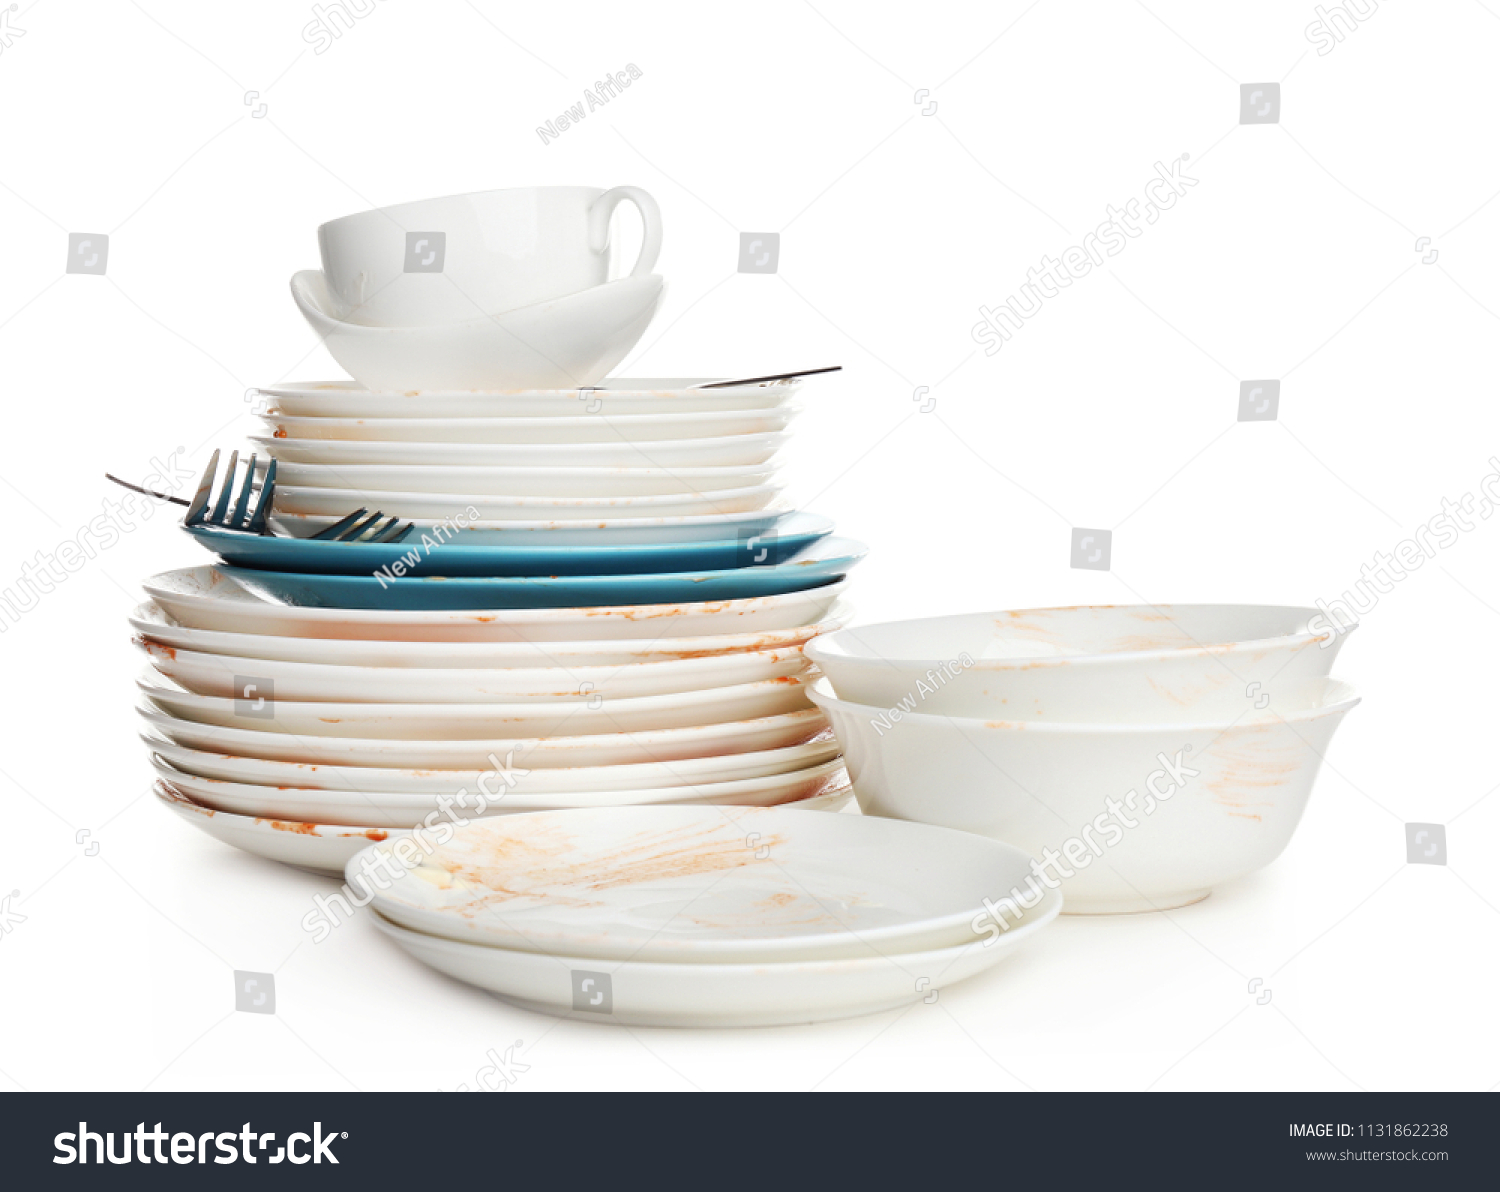 Pile of dirty kitchenware on white background #1131862238